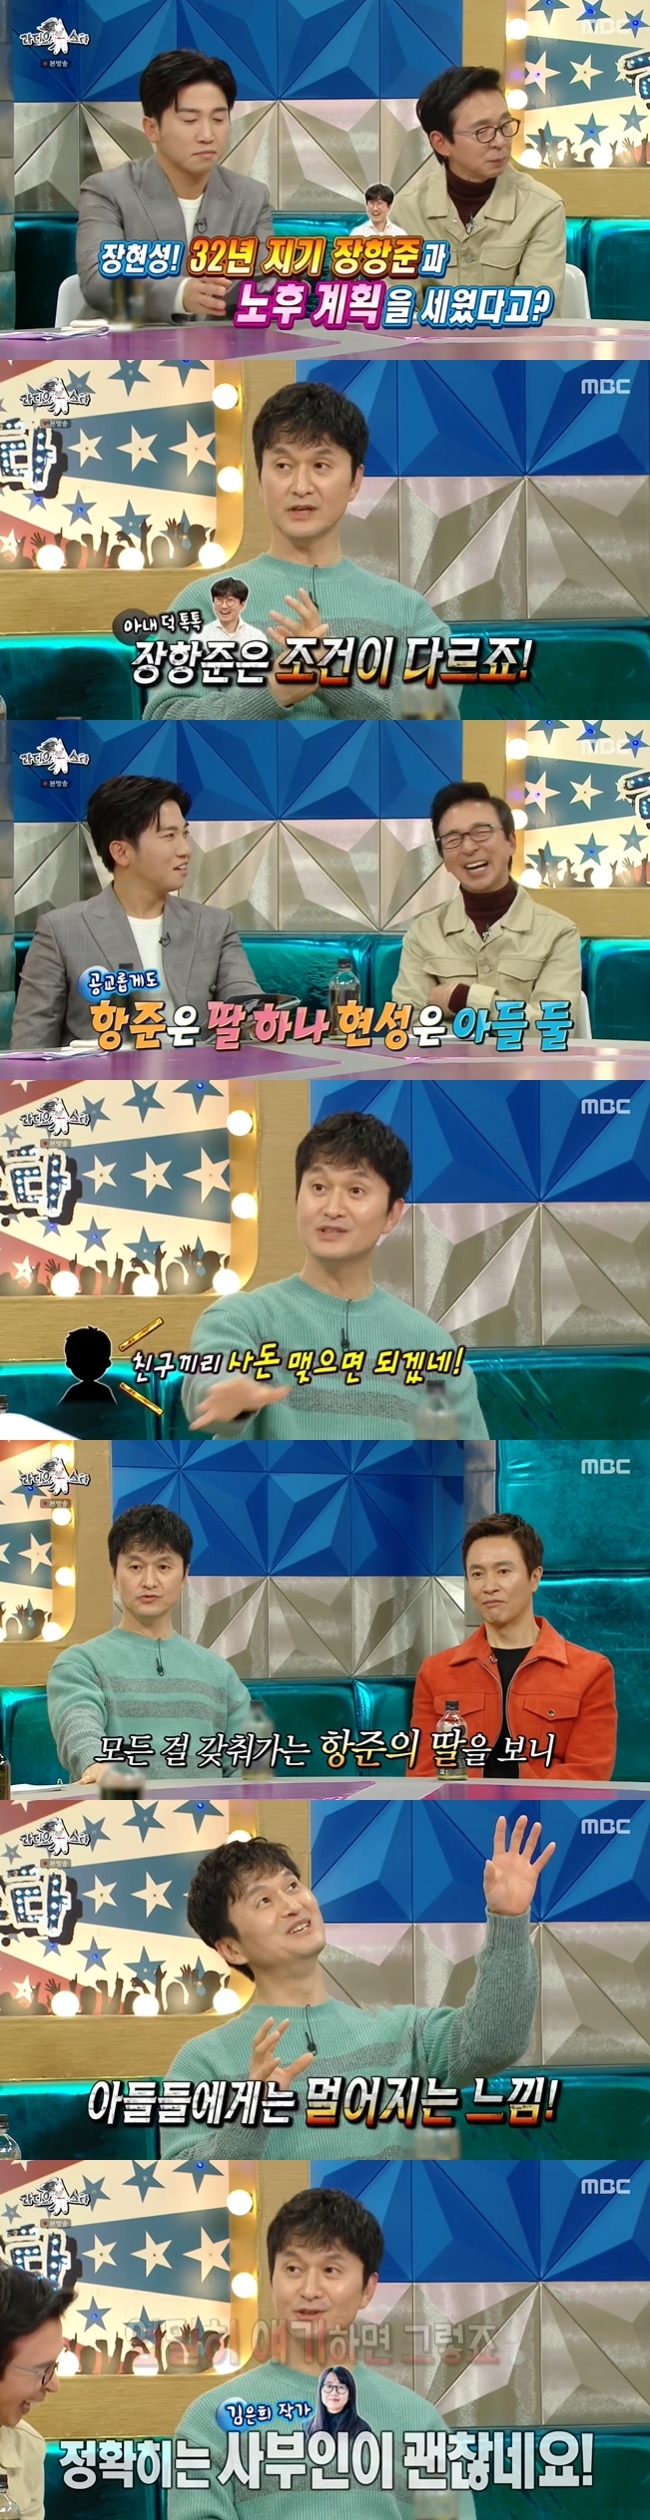 Jang Hyun-sung explained the Norroy-le-Veneur plan he set up with manager Jigi Jang-jun in 32 years.On MBC Radio Star broadcast on December 15, Jang Hyun-sung boasted a strong friendship with Jang Hang-jun and Kim Eun-hee.On this day, Jang Hyun-sung asked whether he had planned a Norroy-le-Veneur with Jang-Hang-jun, saying, I am a person who has a job as an actor and has nothing better than my peer office worker.Jang Hang-jun has a slightly different condition when he experiences the same daily life that ordinary peers experience. Jang Hyun-sung mentioned his two sons and the daughters of Jang Hang-jun and Kim Eun-hee.Unfortunately, there is one daughter and two sons, and the age is between.People joke that they can make friends later, but when they were young, they thought they could get close enough, but their daughter, Yoon Seo, grows up too well. Ive been awarded a big prize for the Youth Literature Award, and Im amiable at writing and speaking well, and Feelings, who are getting away from our sons with everything in place.Im trying to fold the vague Feelings, he added.